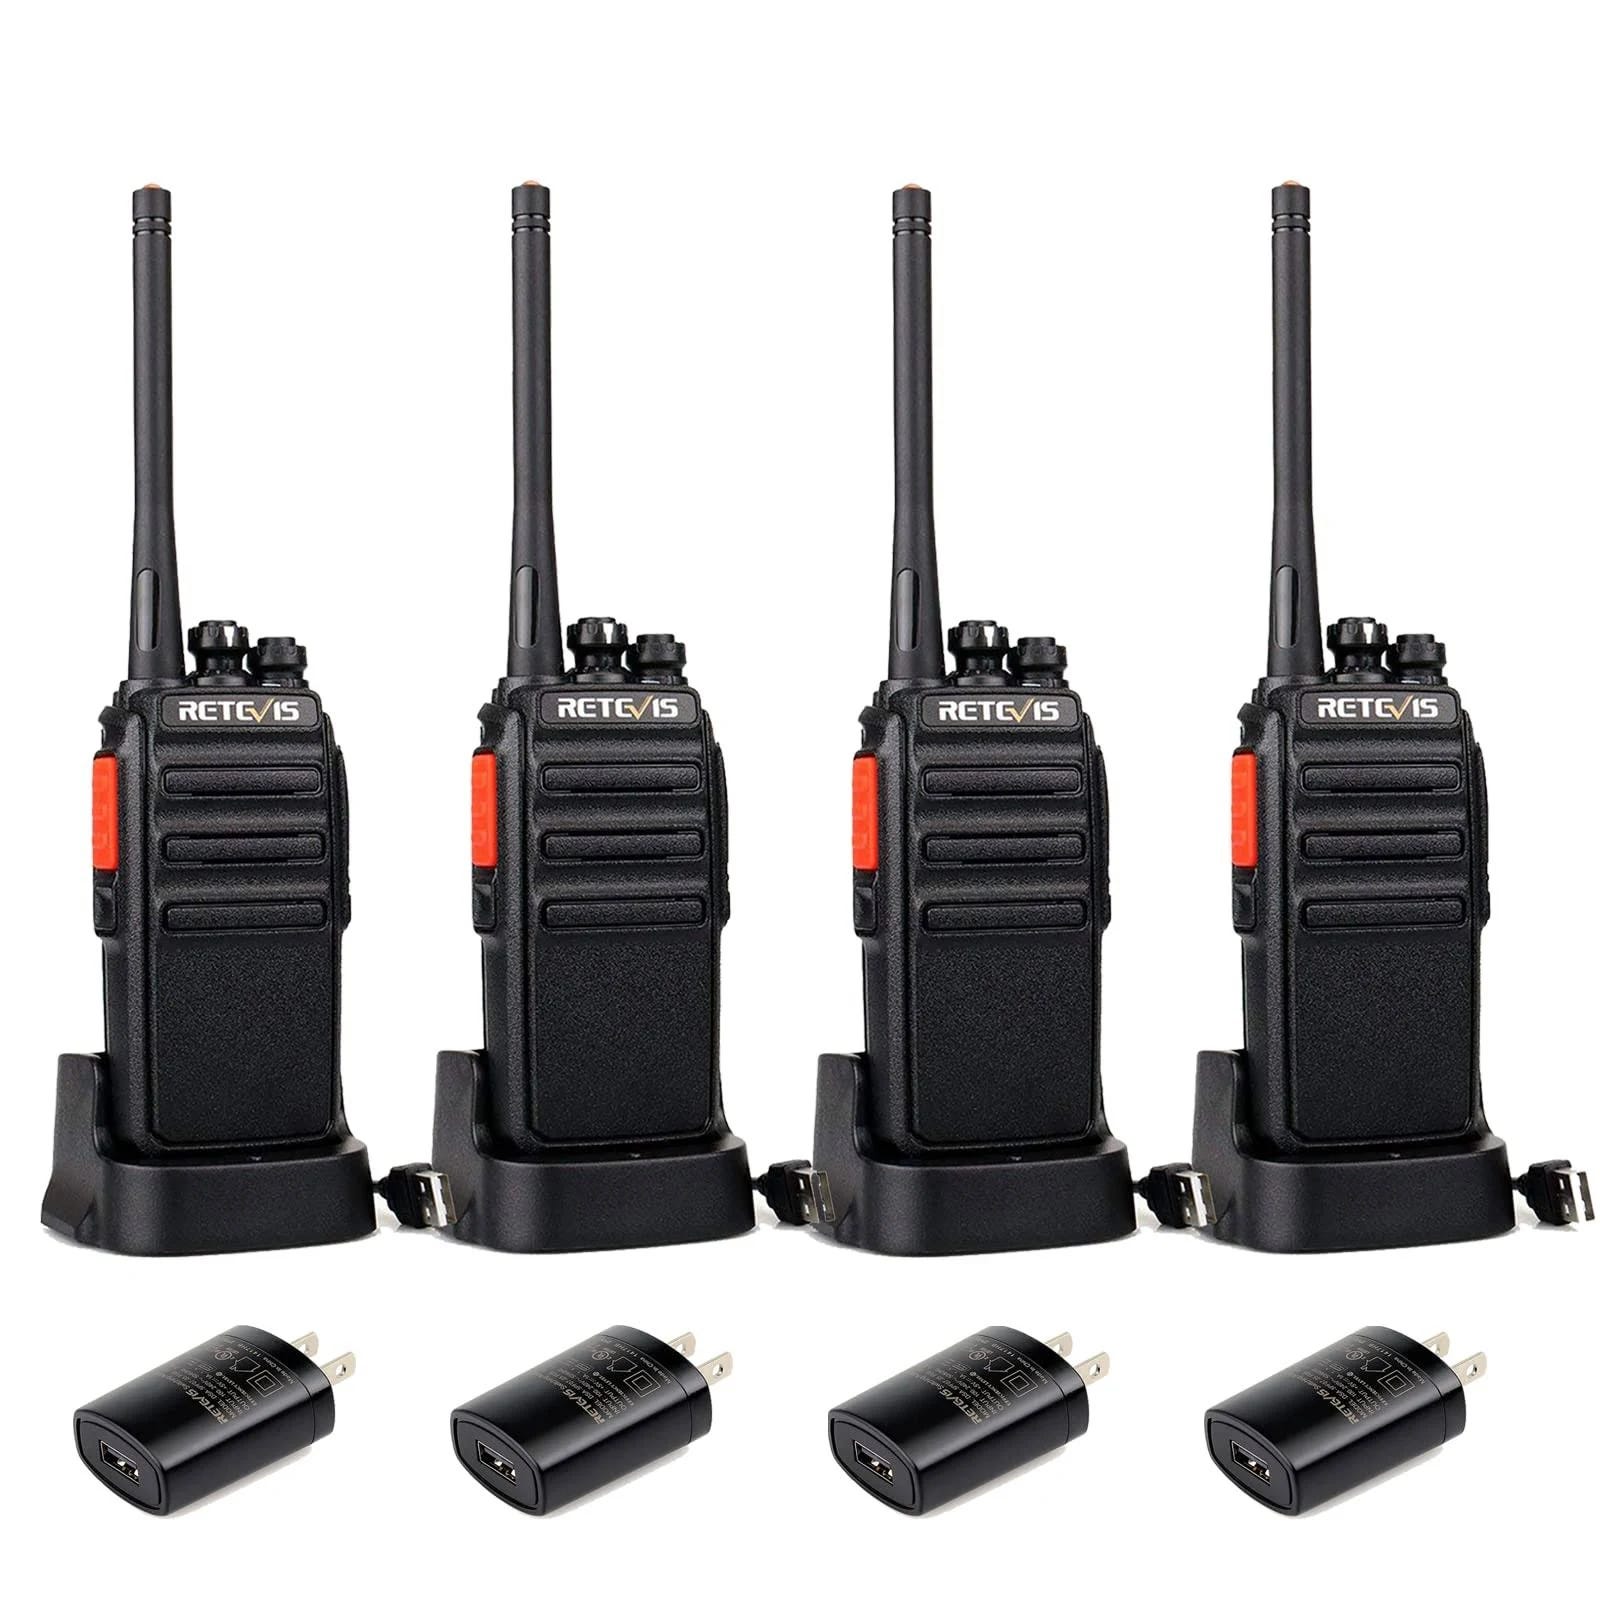 Retevis H-777S Walkie Talkies: Long Range, Compact, and Durable | Image